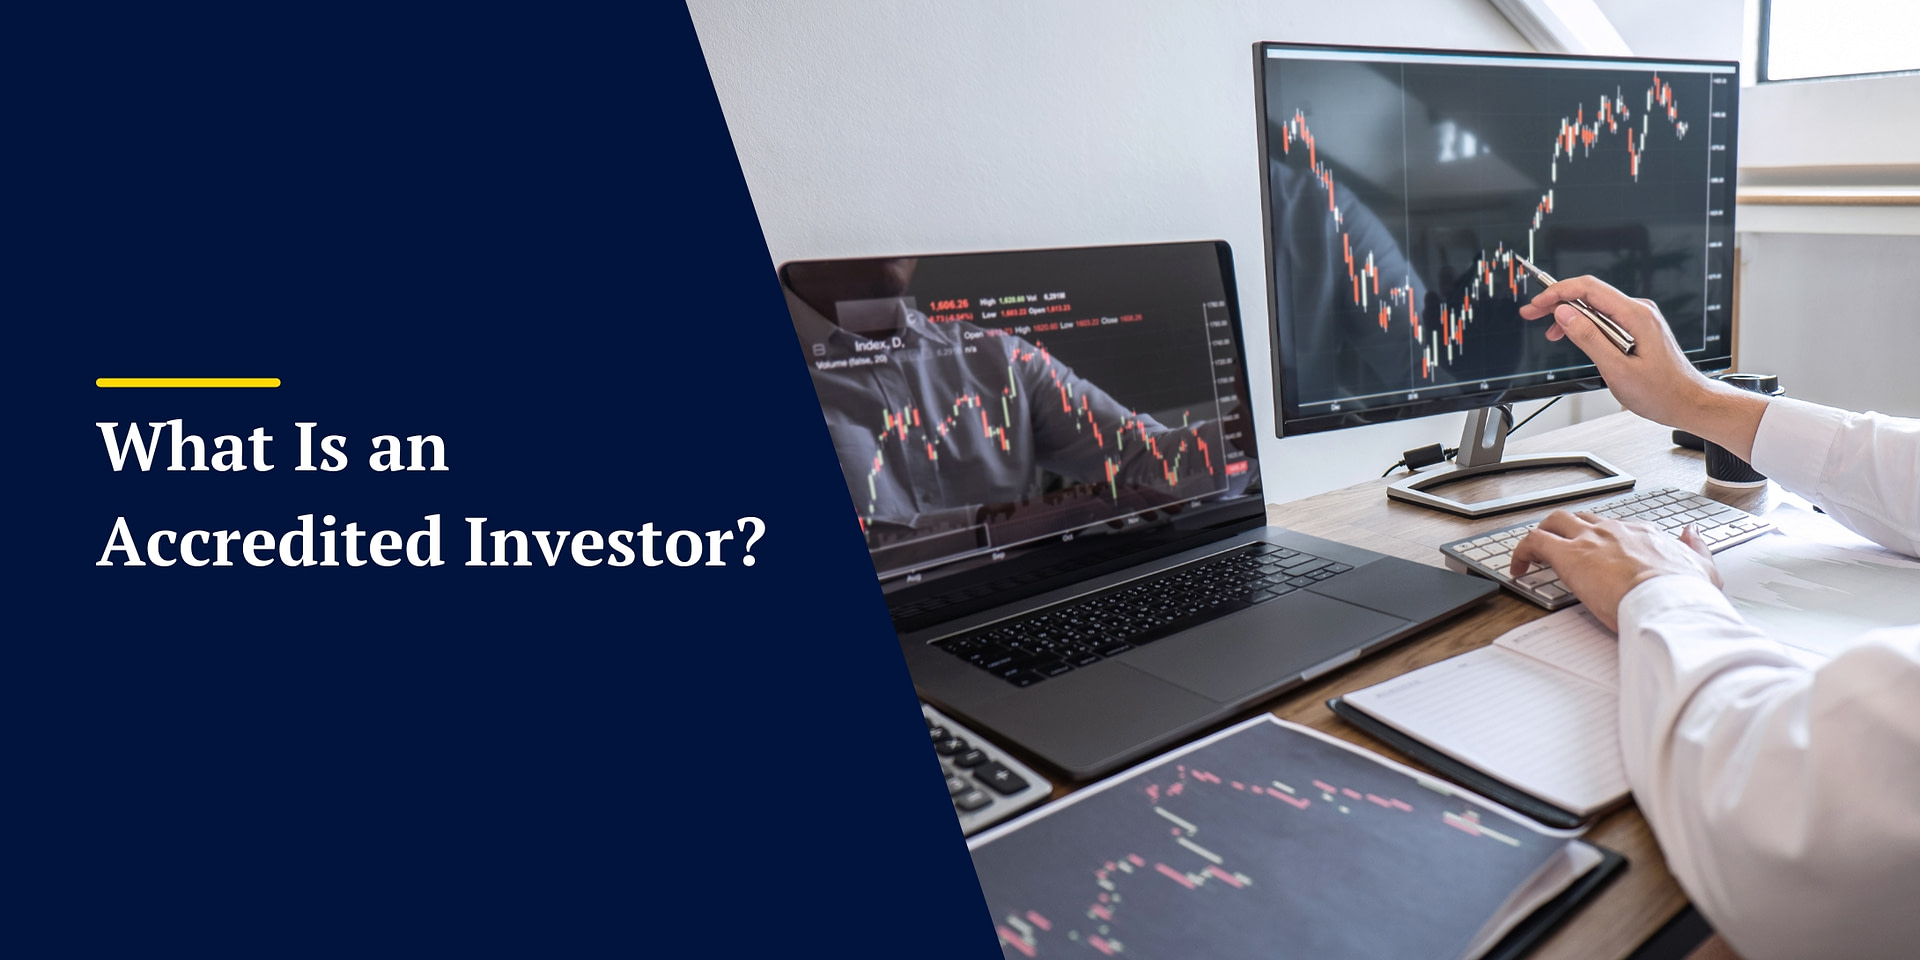 What Is an Accredited Investor